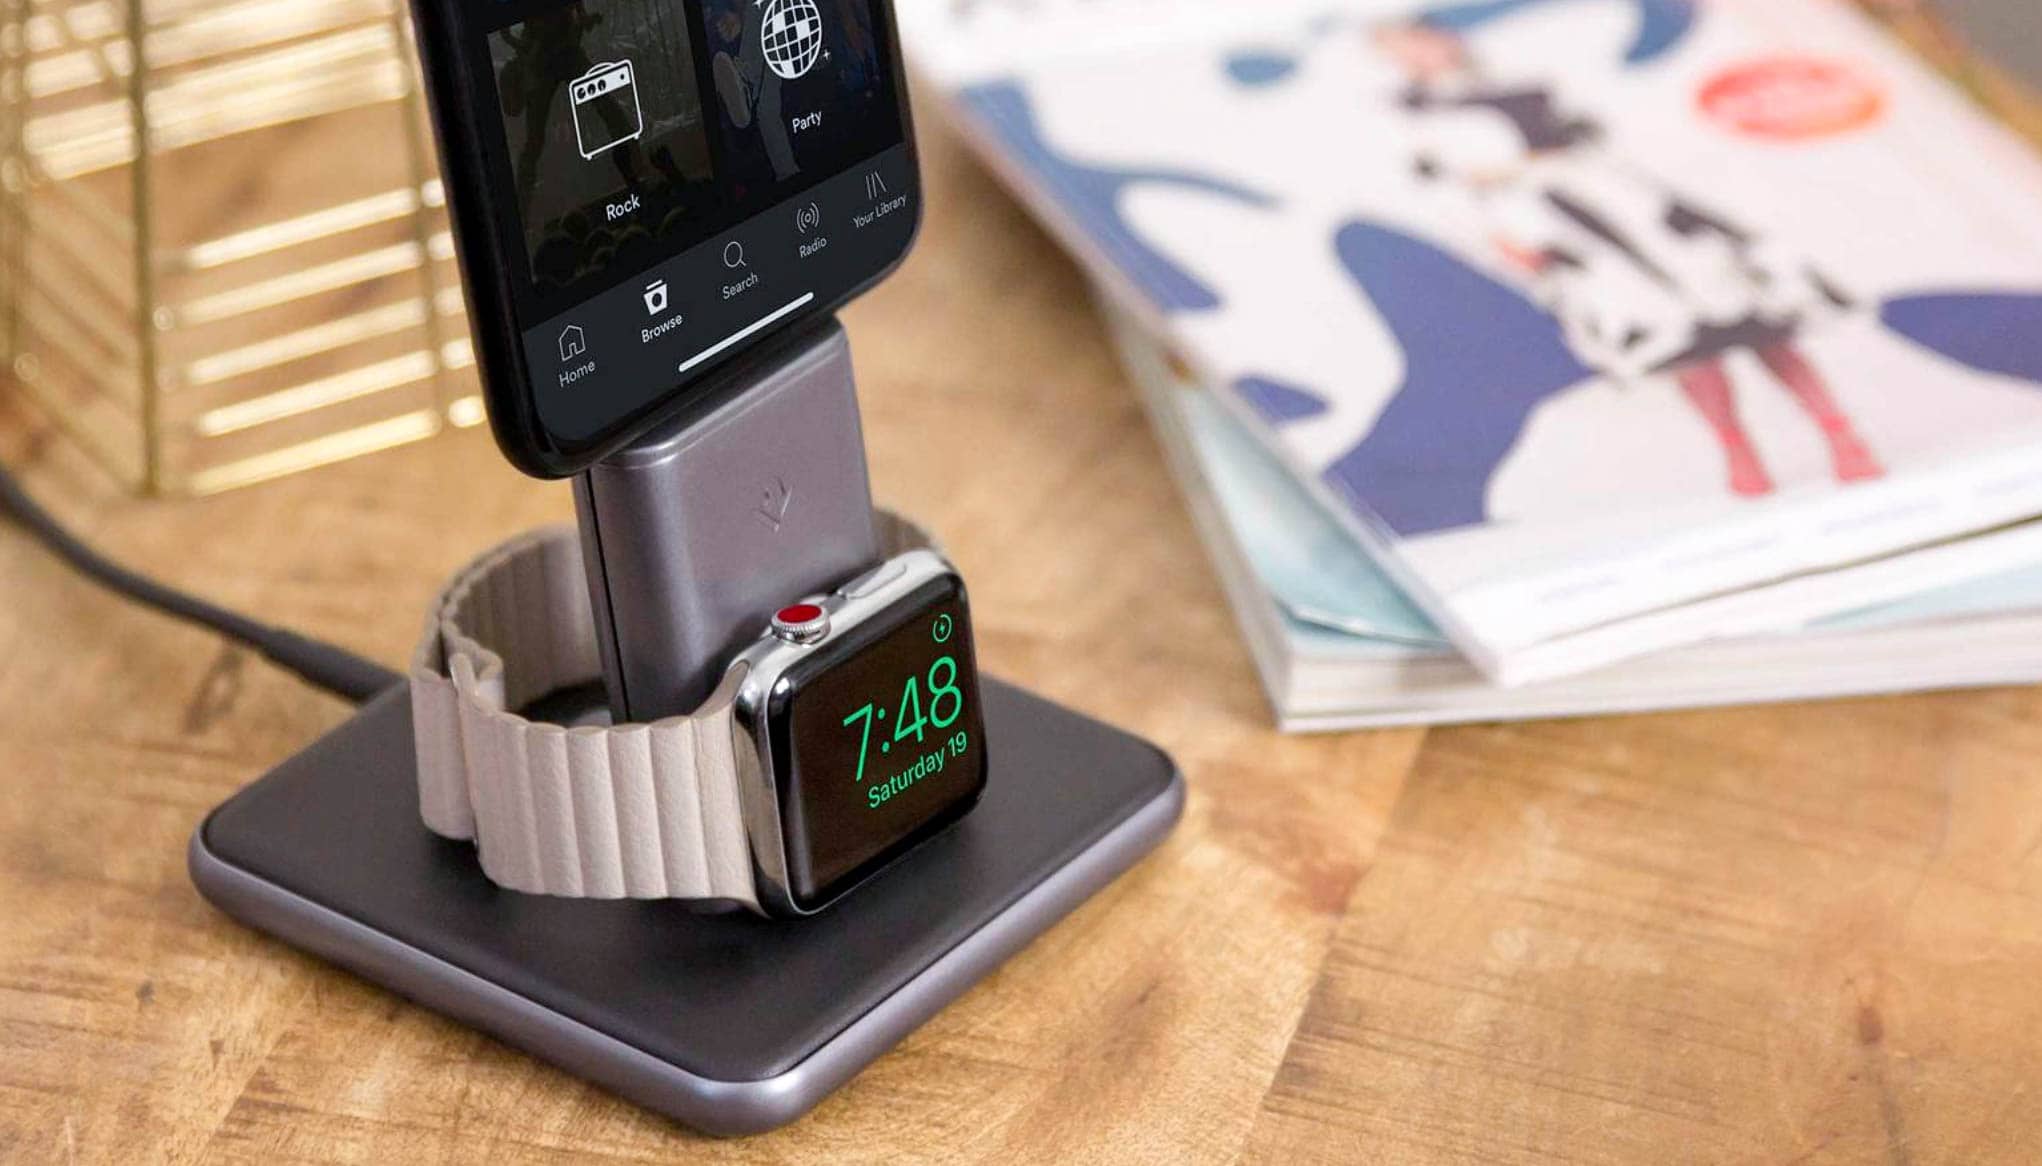 HiRise Duet is the first dual charging stand that powers up Apple Watch in Nightstand mode.